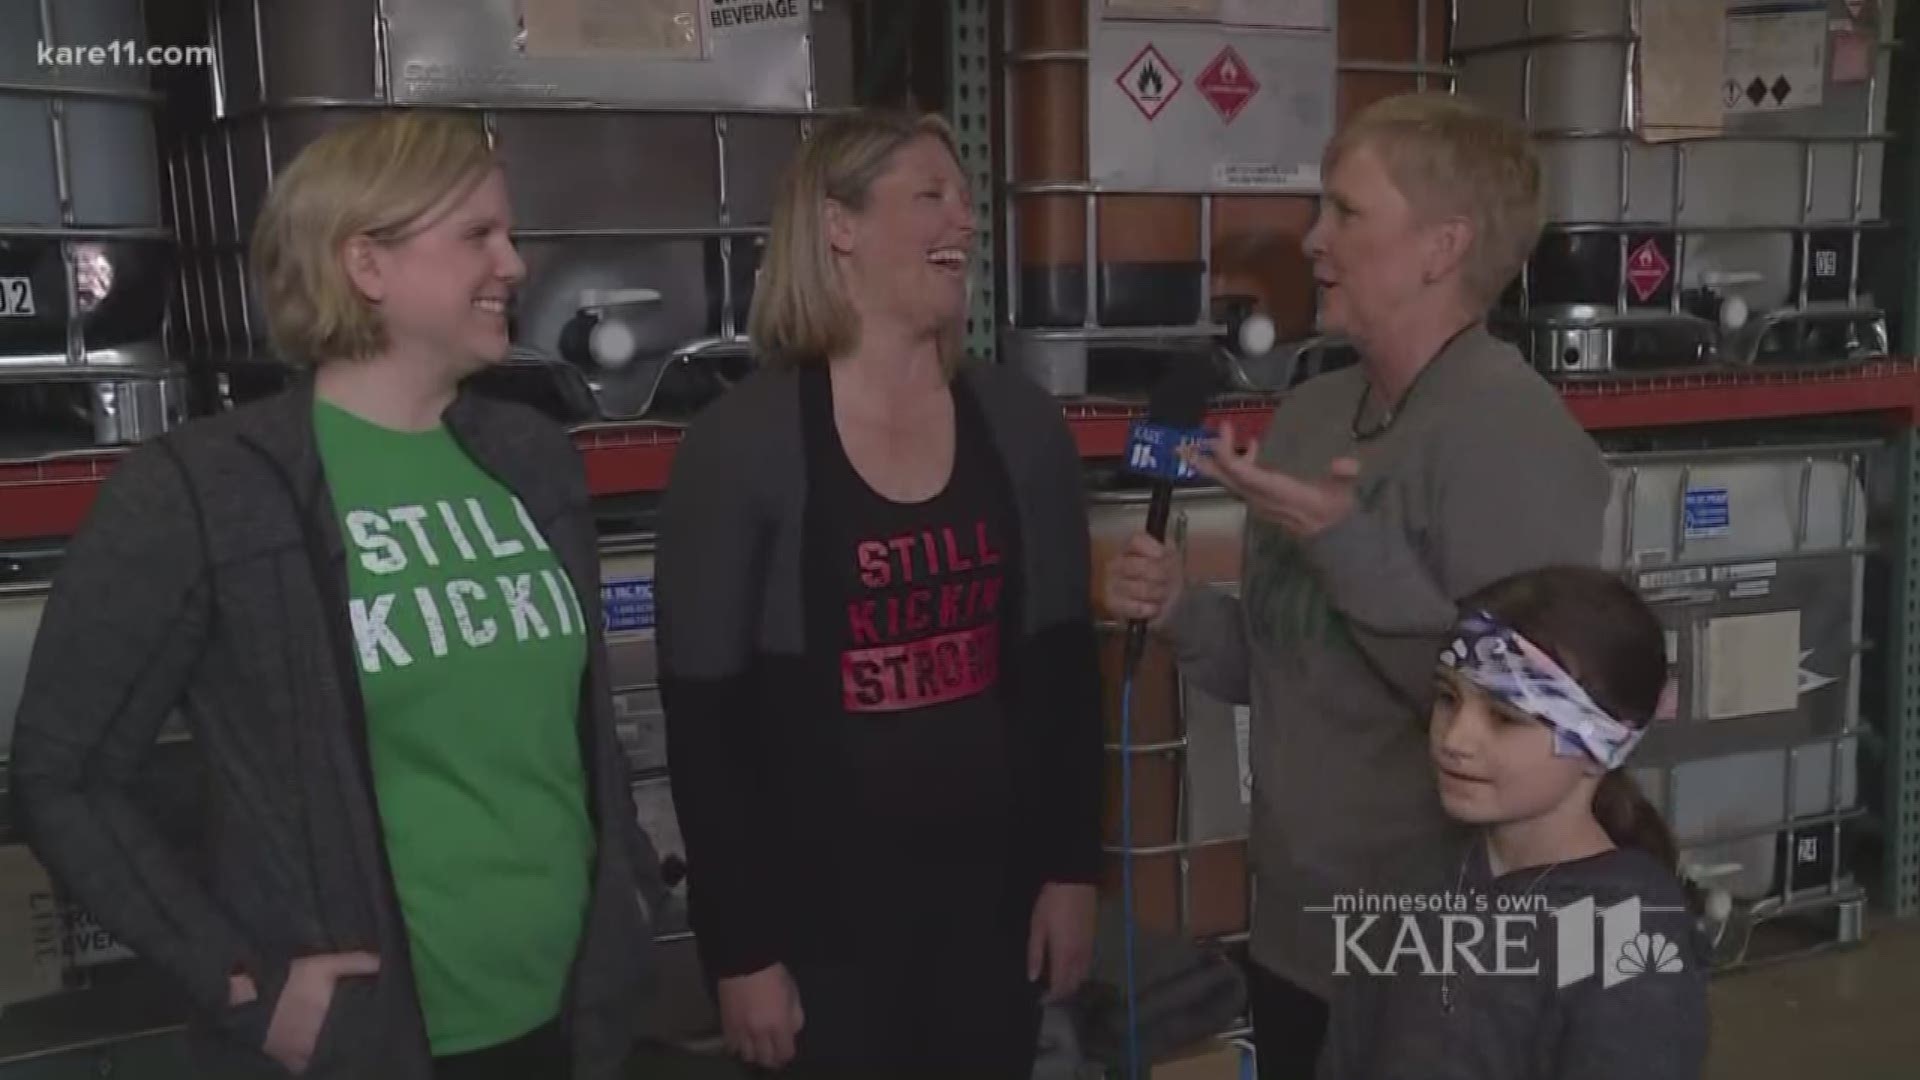 Lee Valsvik is at the Still Kickin' fundraising event that includes working out, eating and drinking for a good cause.